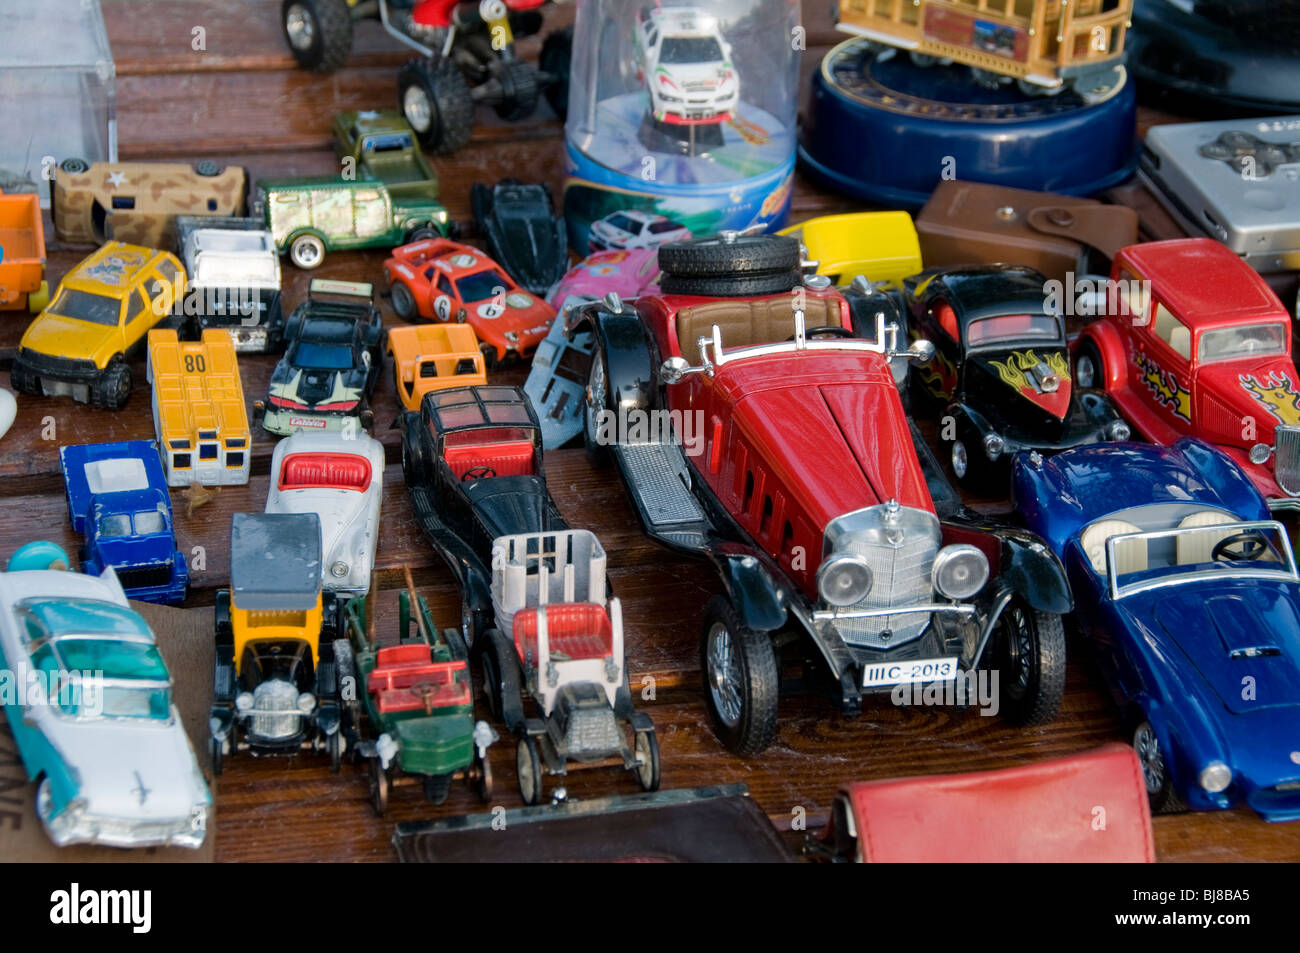 Second Hand Toys Stock Photos & Second Hand Toys Stock Images - Alamy